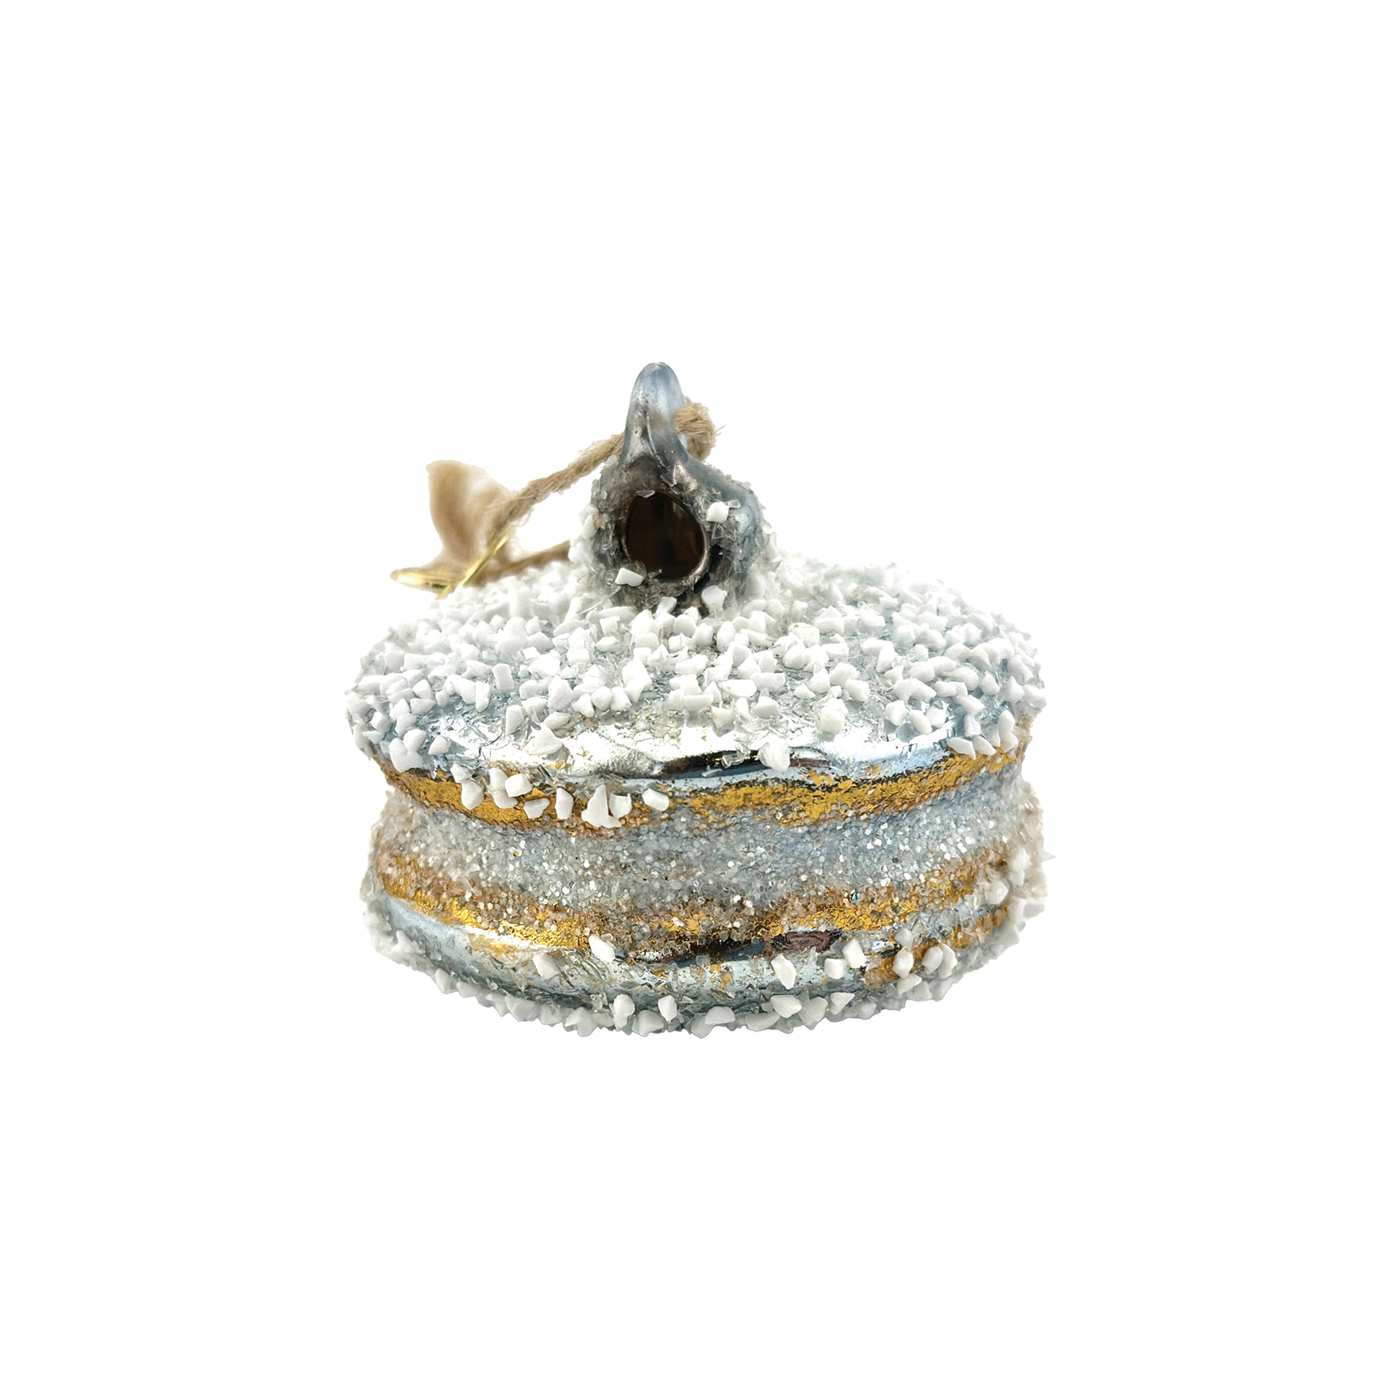 Macaroon Ornament - Light Blue With Frosting